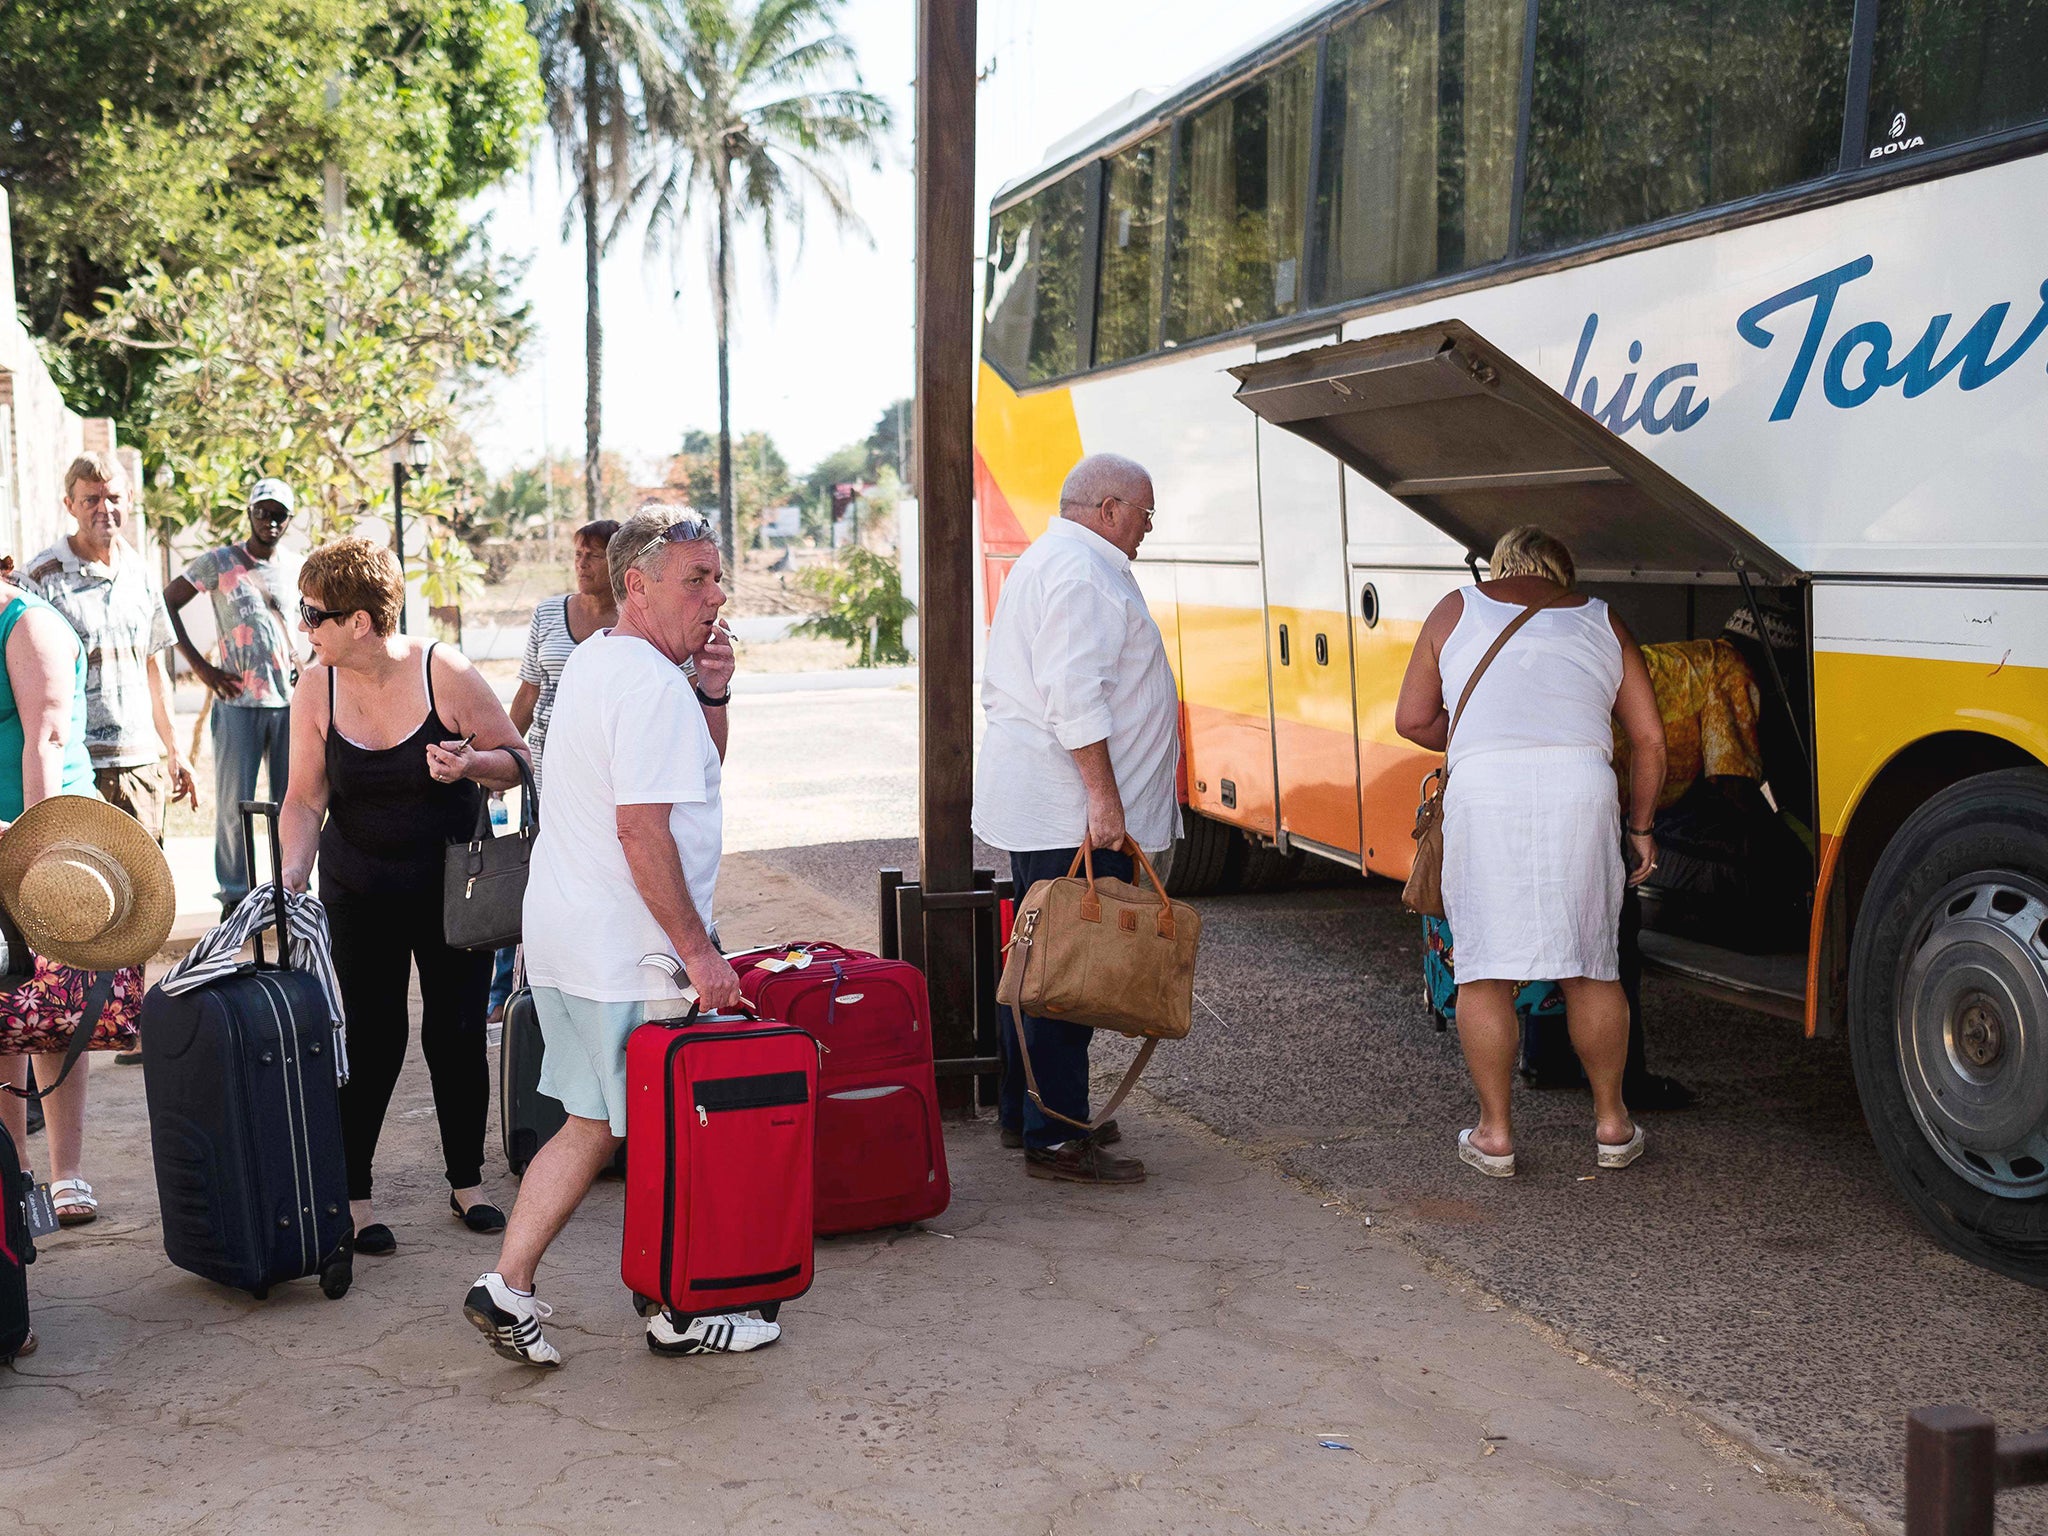 Tourists load luggage onto a bus in preparation to leave the Gambia after the British Government changed the travel advisory to amber due to the state of emergency issued by Gambian President Jammeh in Banjul, Gambia